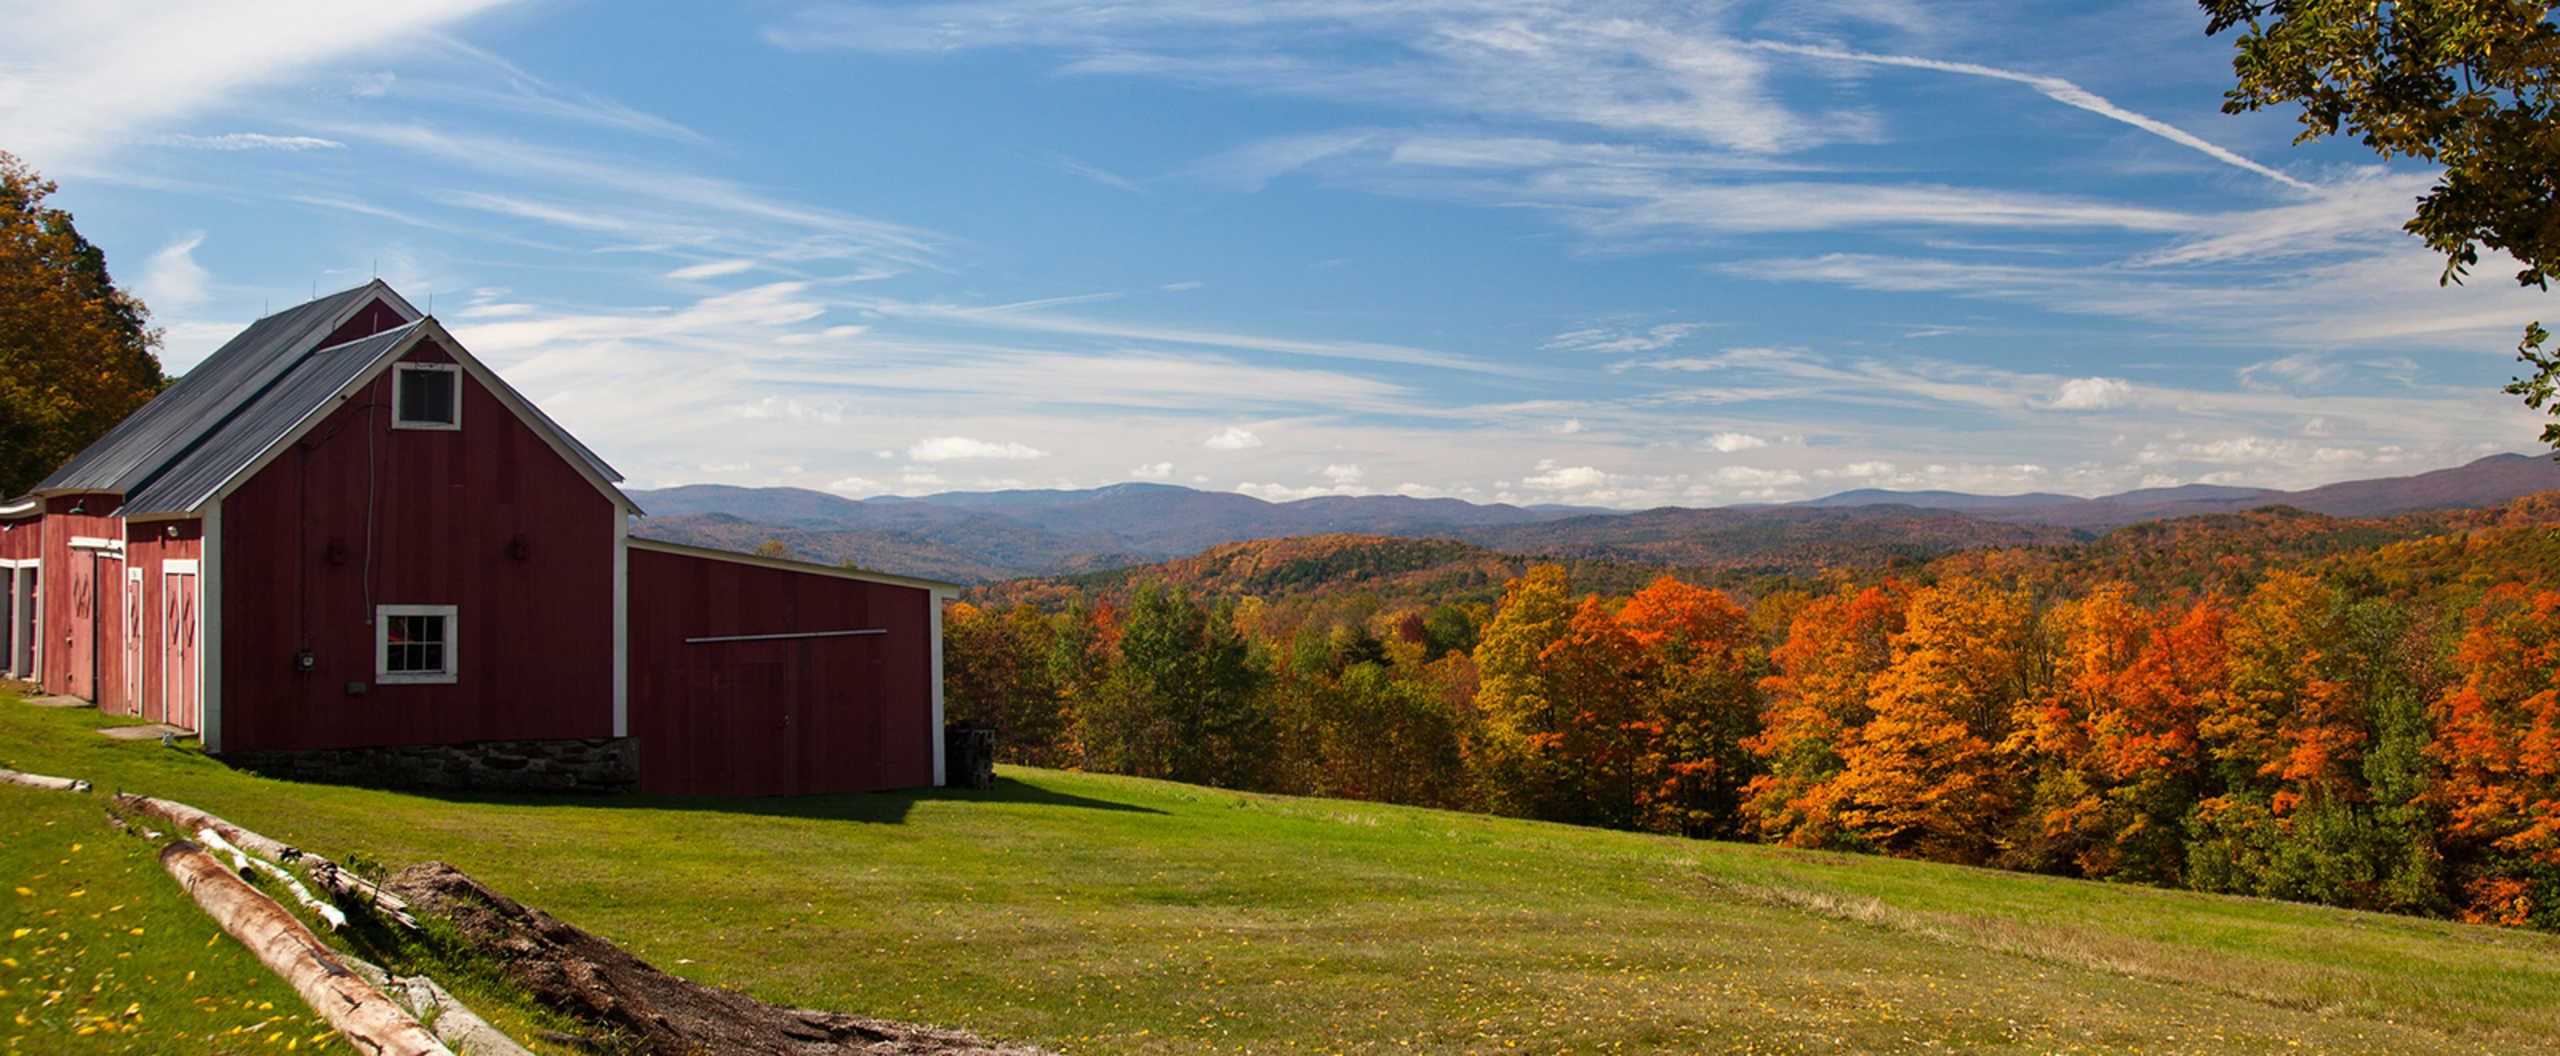 From Southern Vermont to the Champlain Valley . . .